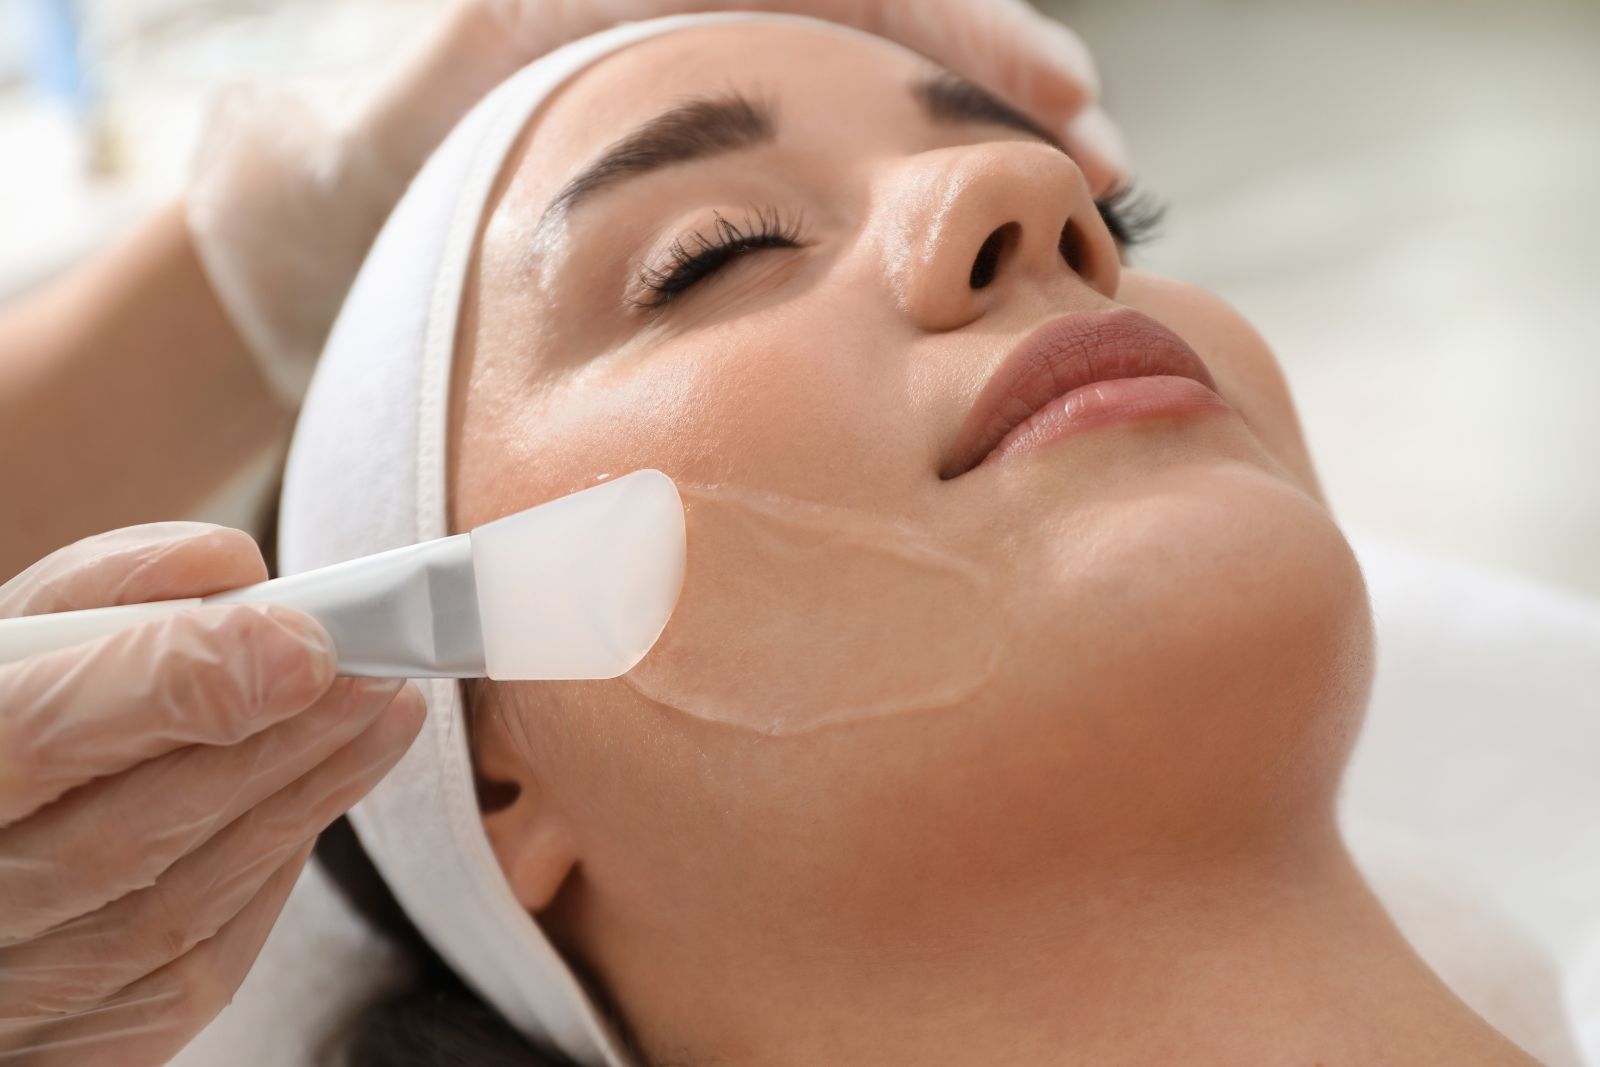 Aesthetician applying a facial mask on a relaxed woman at a spa.